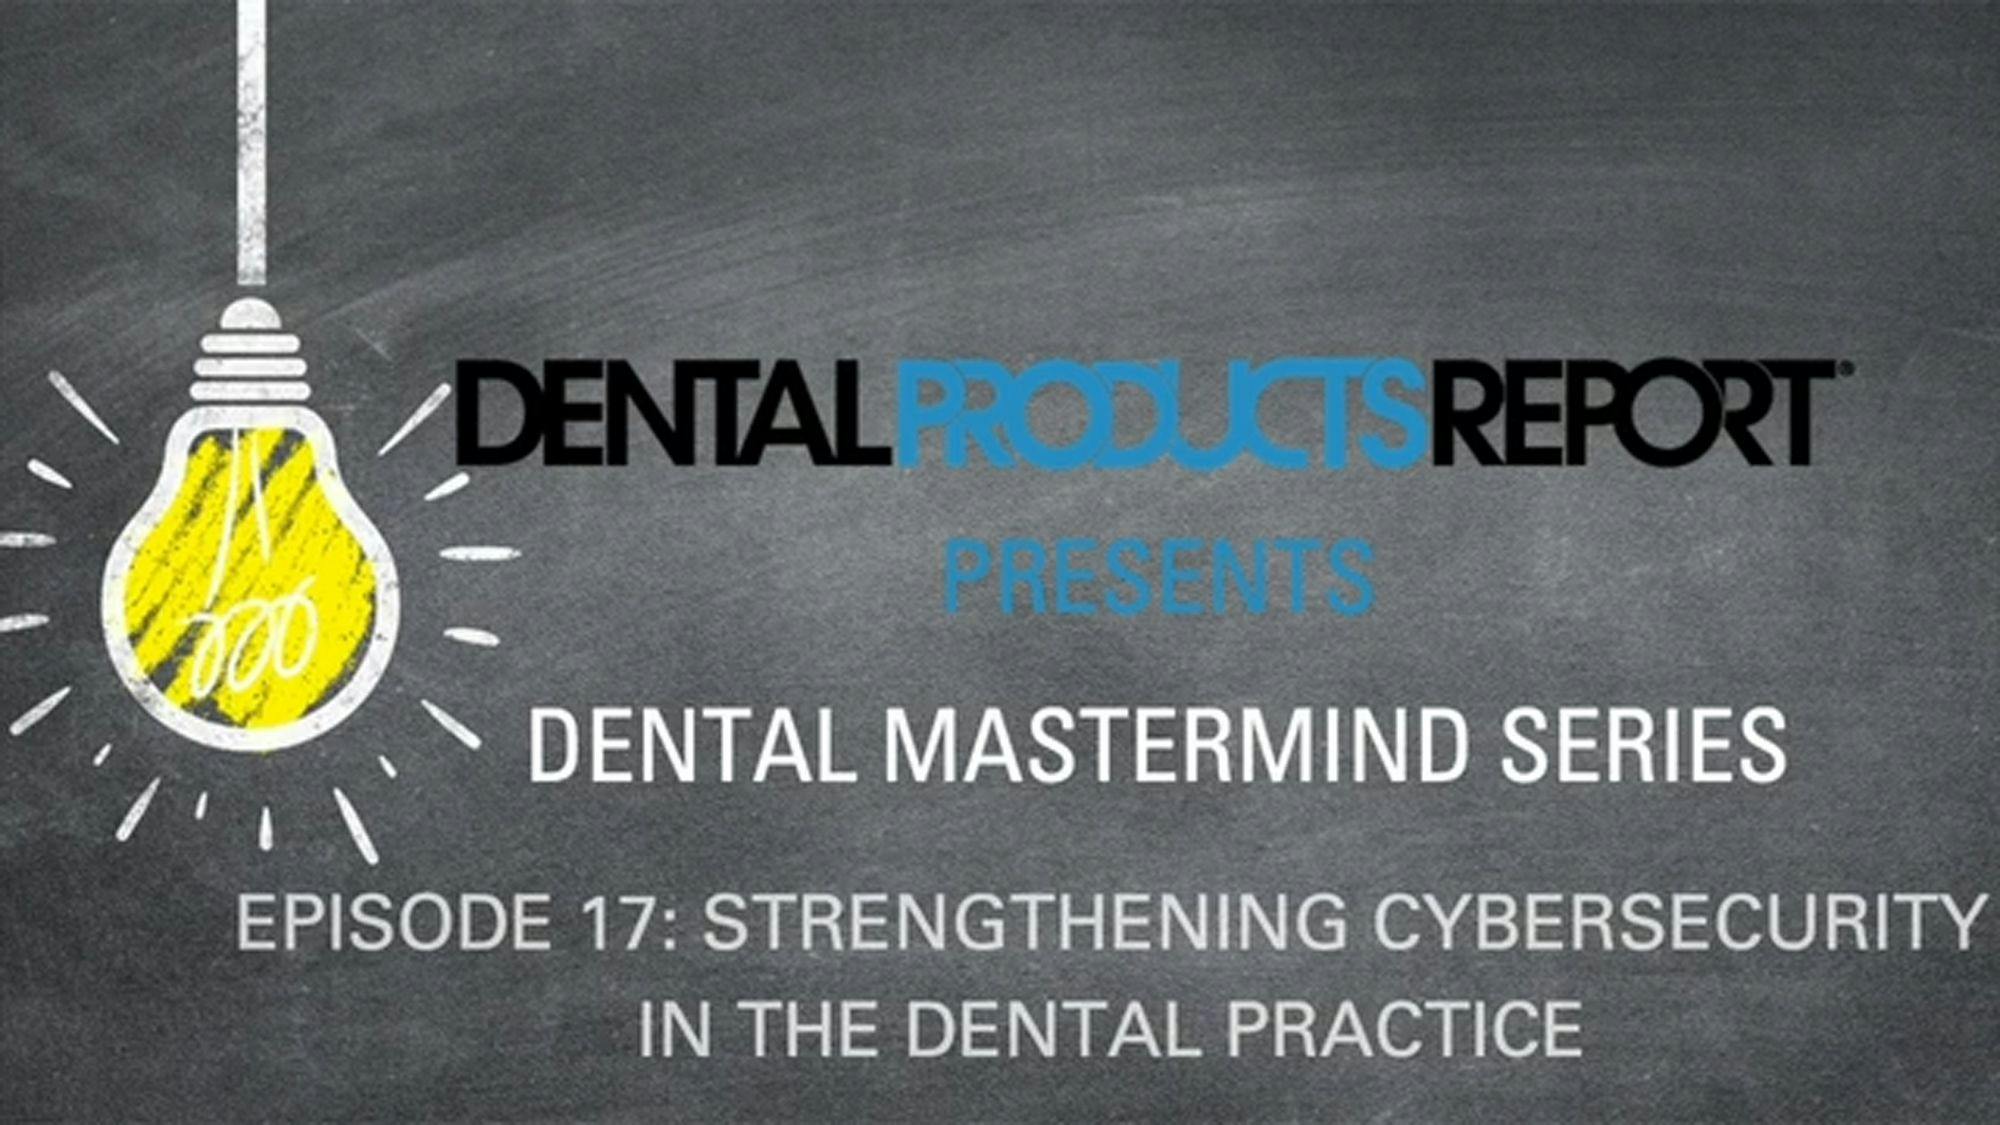 Mastermind - Episode 17 - Strengthening Cybersecurity in the Dental Practice